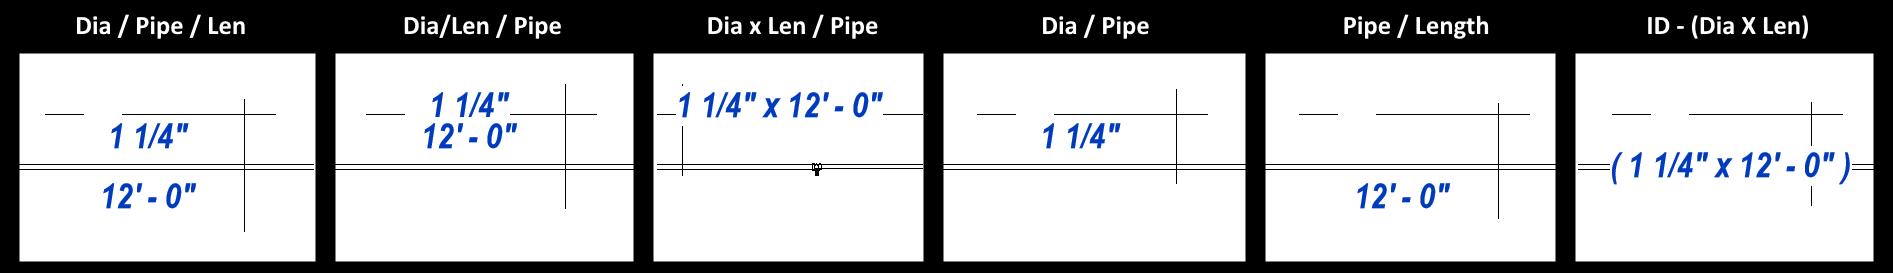 HCAD1 Pipe Size Tags